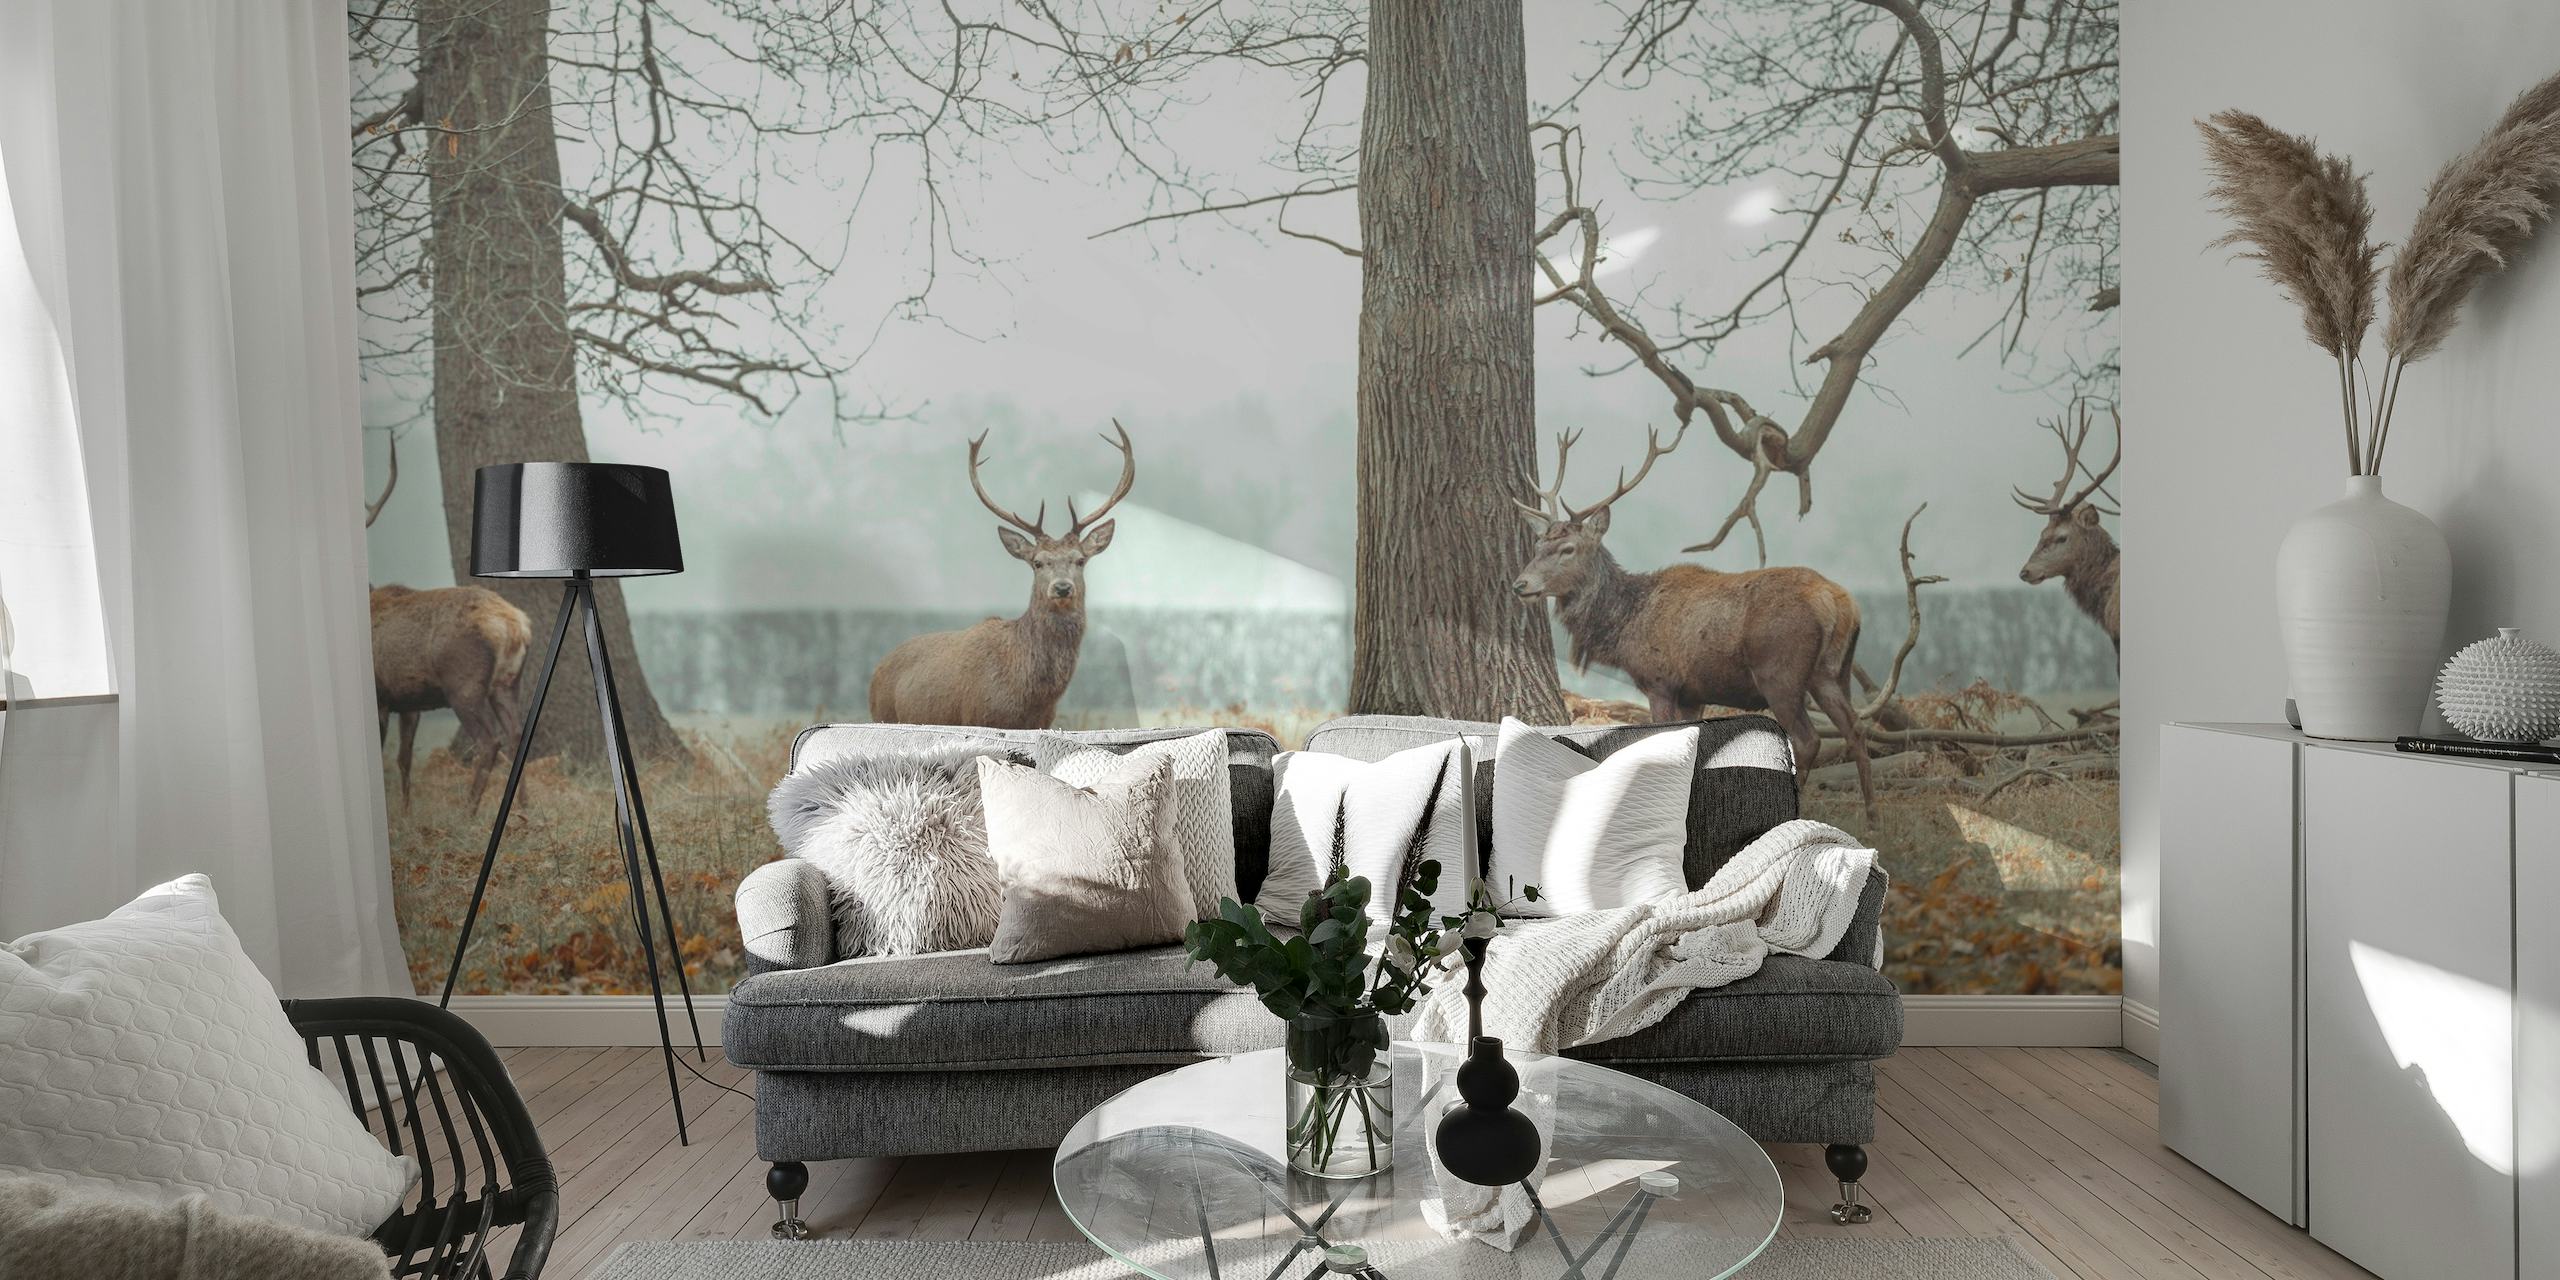 A wall mural showcasing stags standing in a serene, leafless forest, evoking a calm woodland atmosphere.